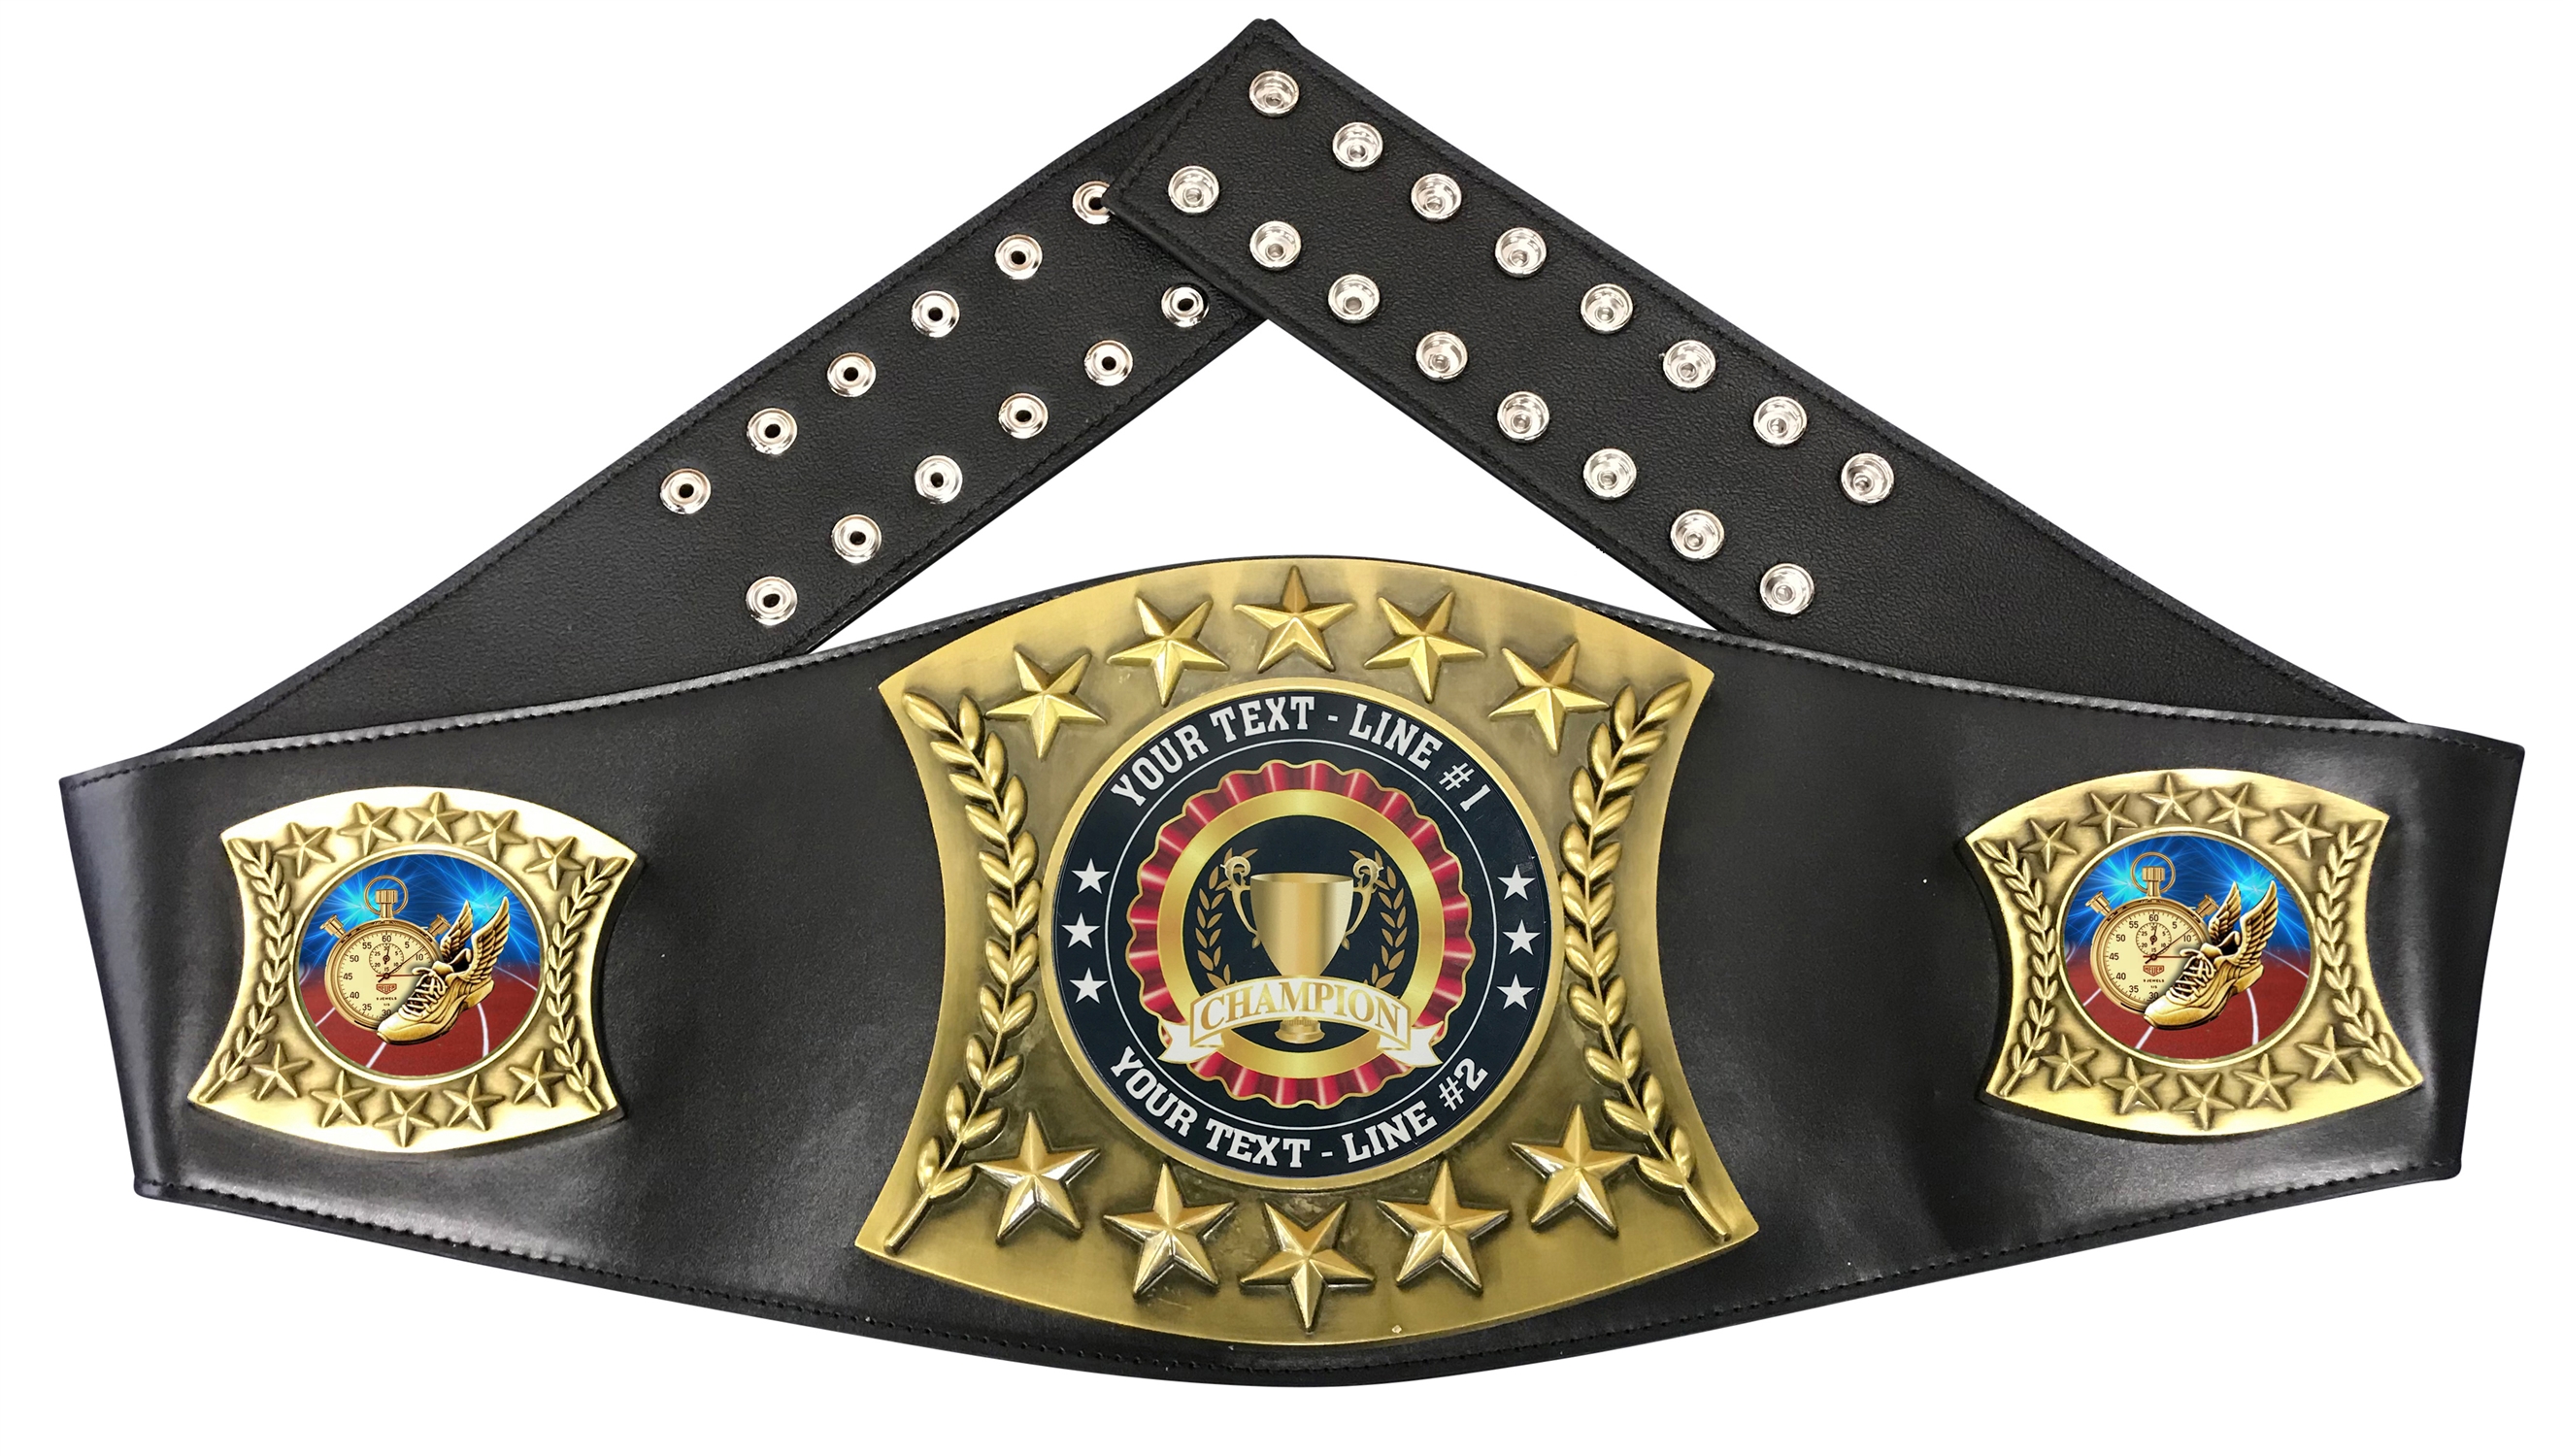 Track Personalized Championship Leather Belt